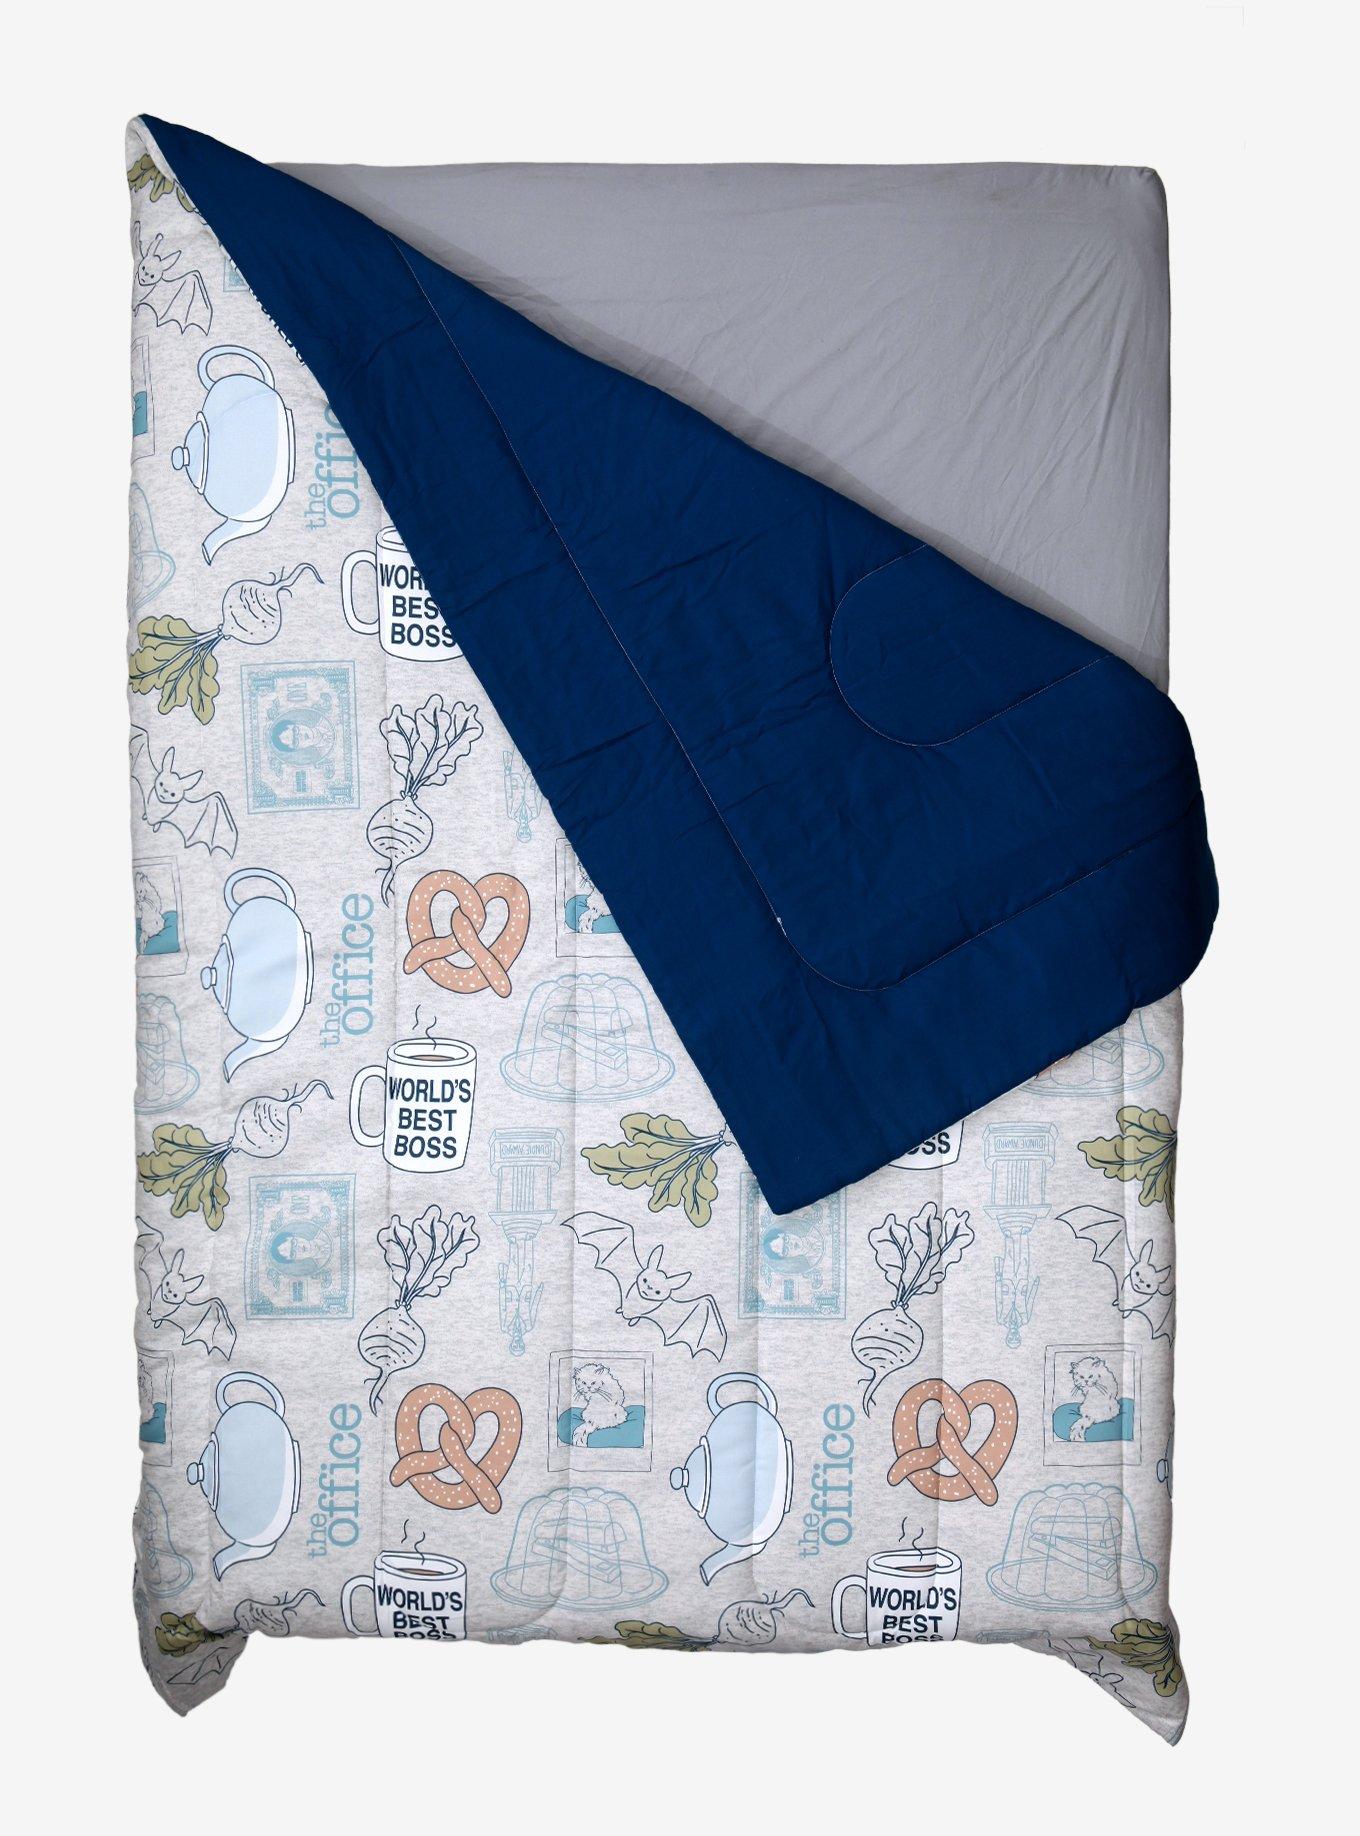 A comforter cozy enough for Schrute Farms Bed & Breakfast (The Office)